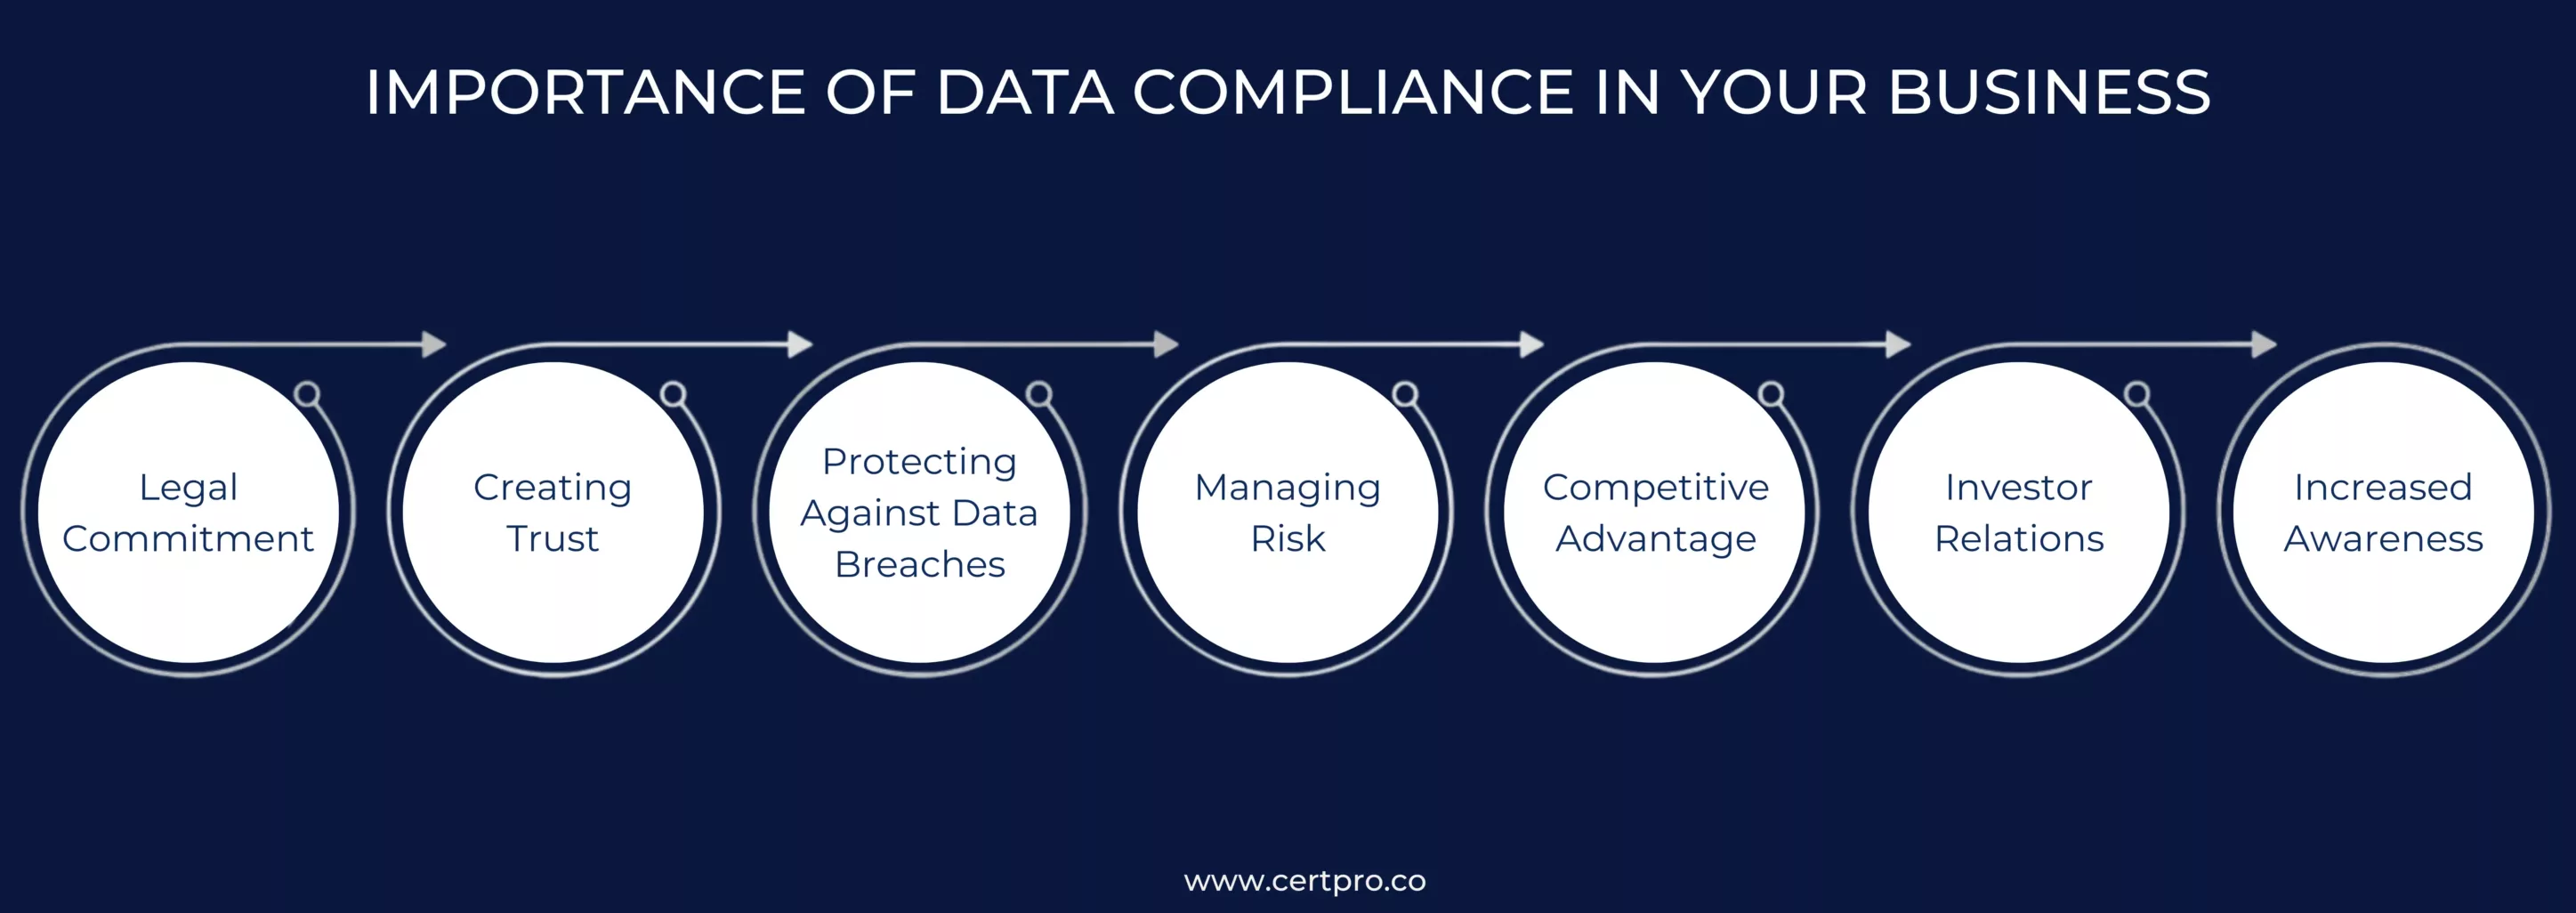 IMPORTANCE OF DATA COMPLIANCE IN YOUR BUSINESS